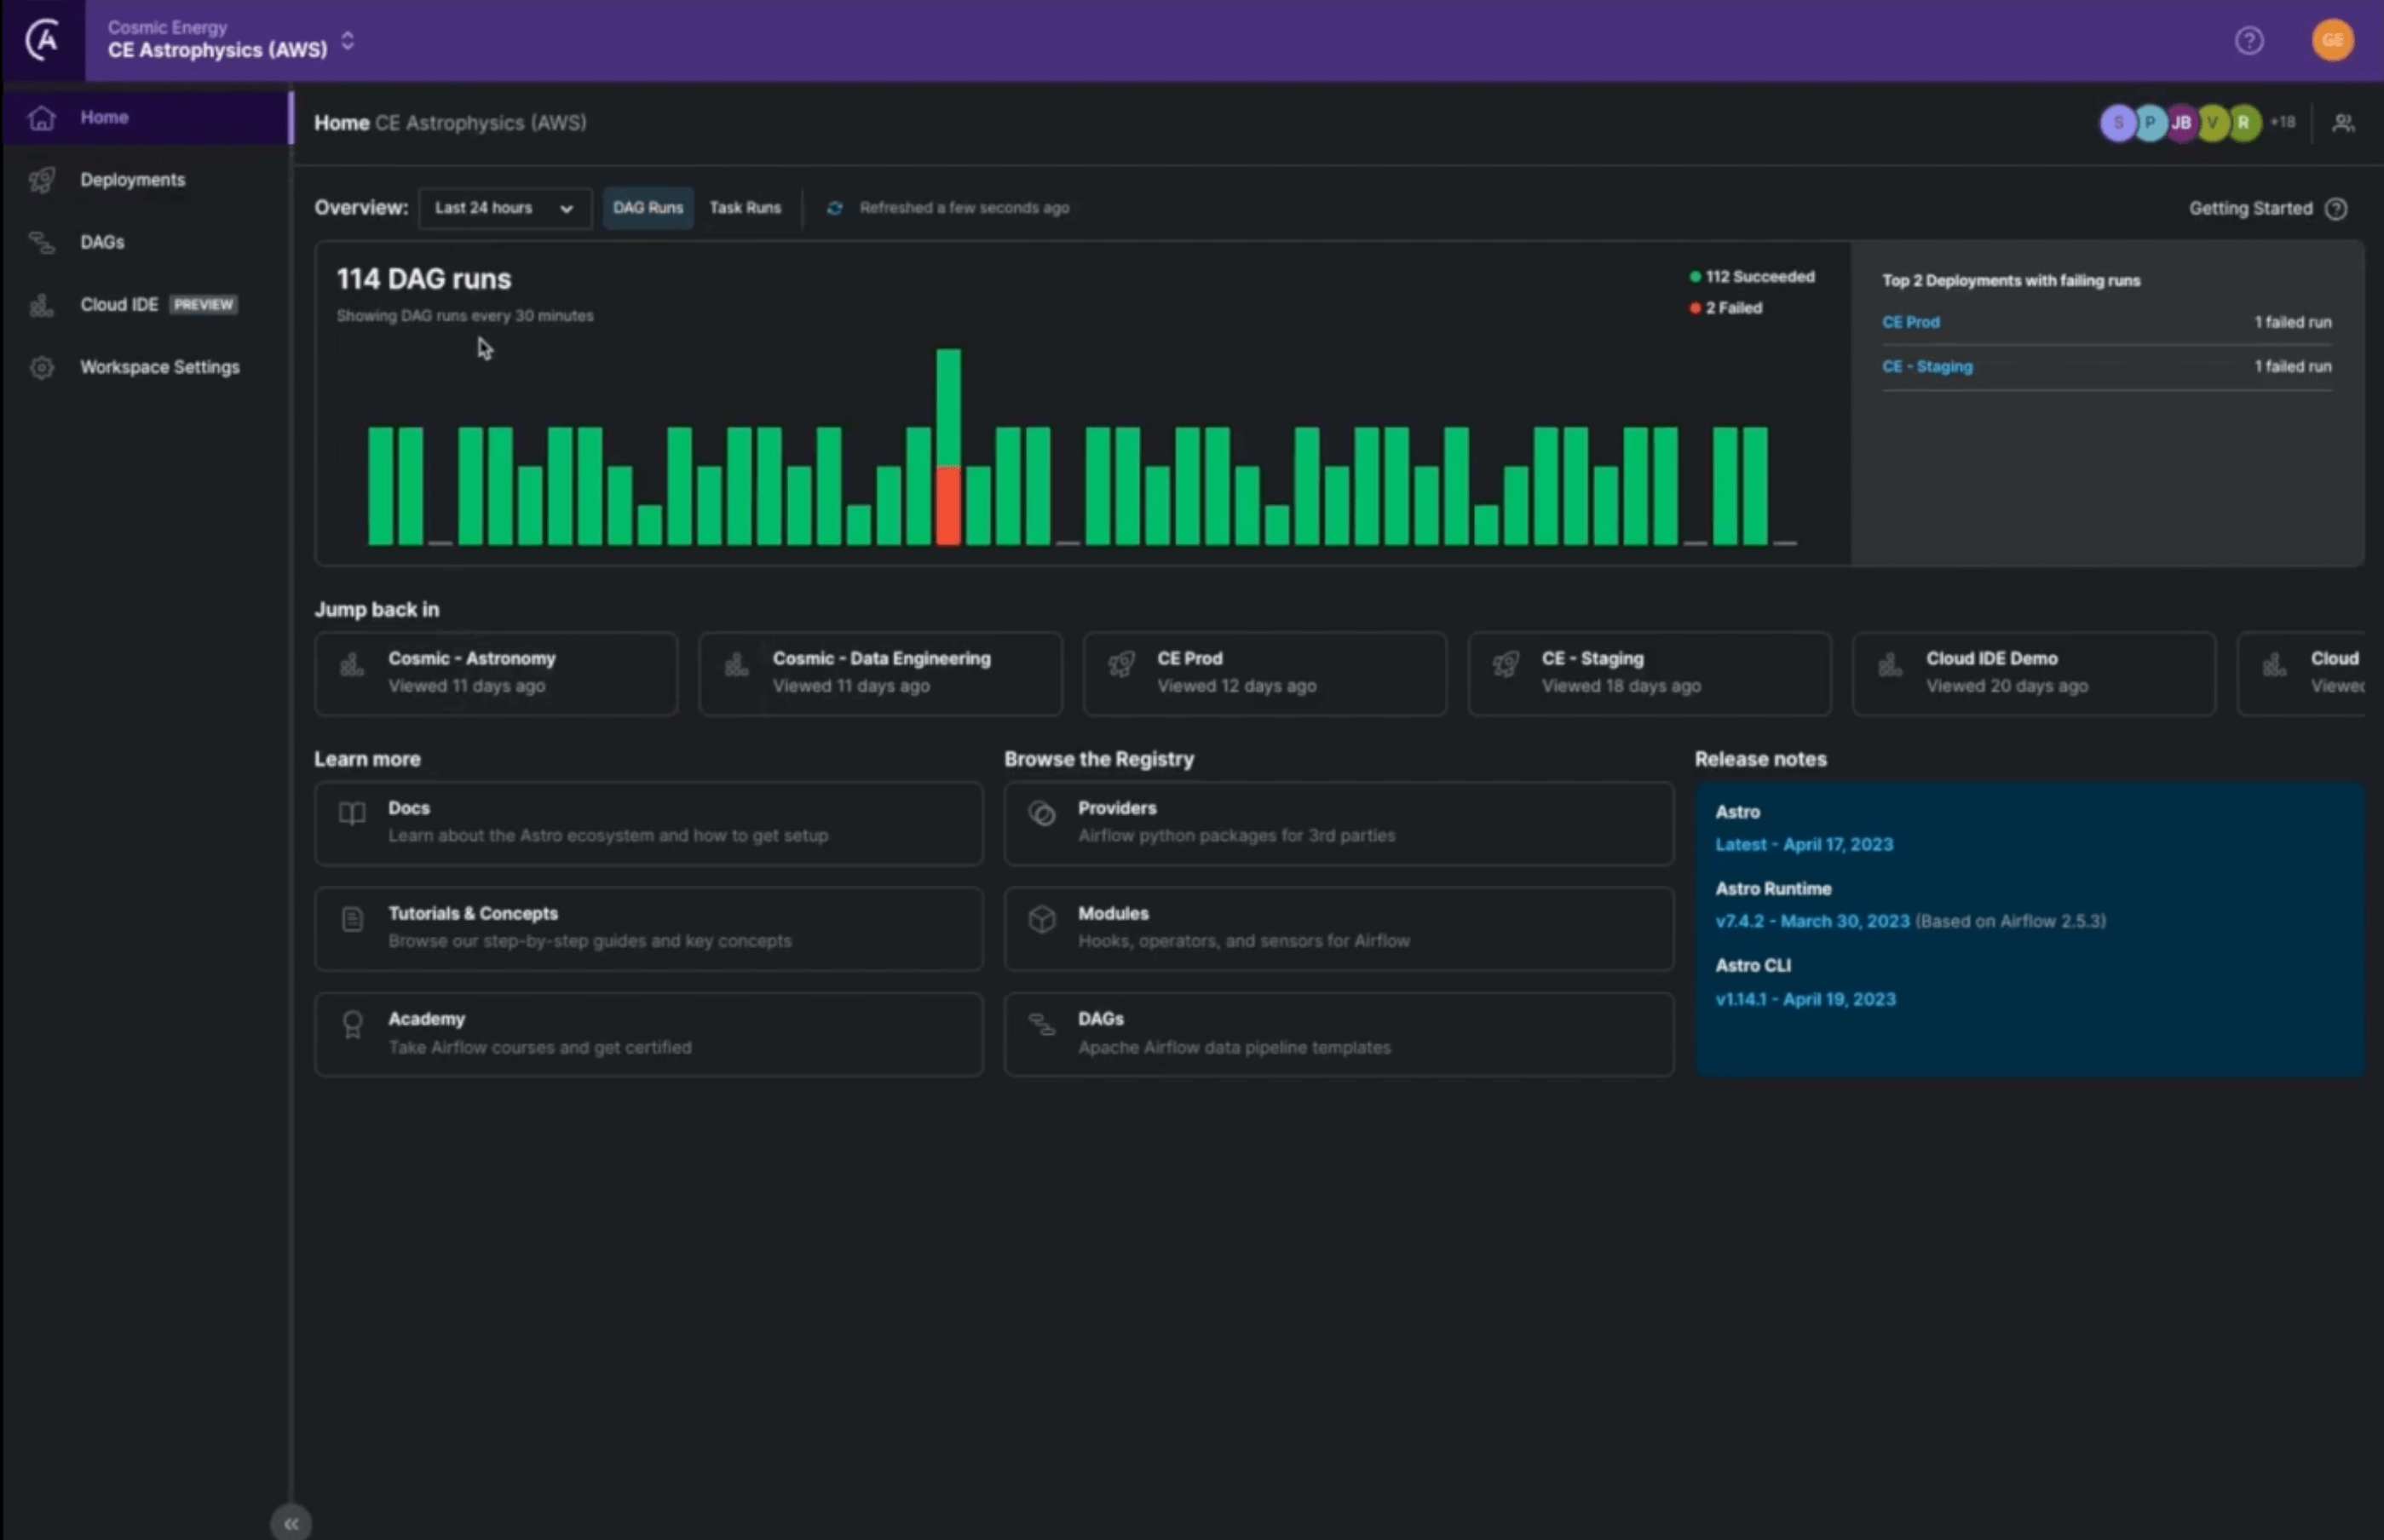 Astro simplifies pipeline failure and task duration by alerting directly from the UI.